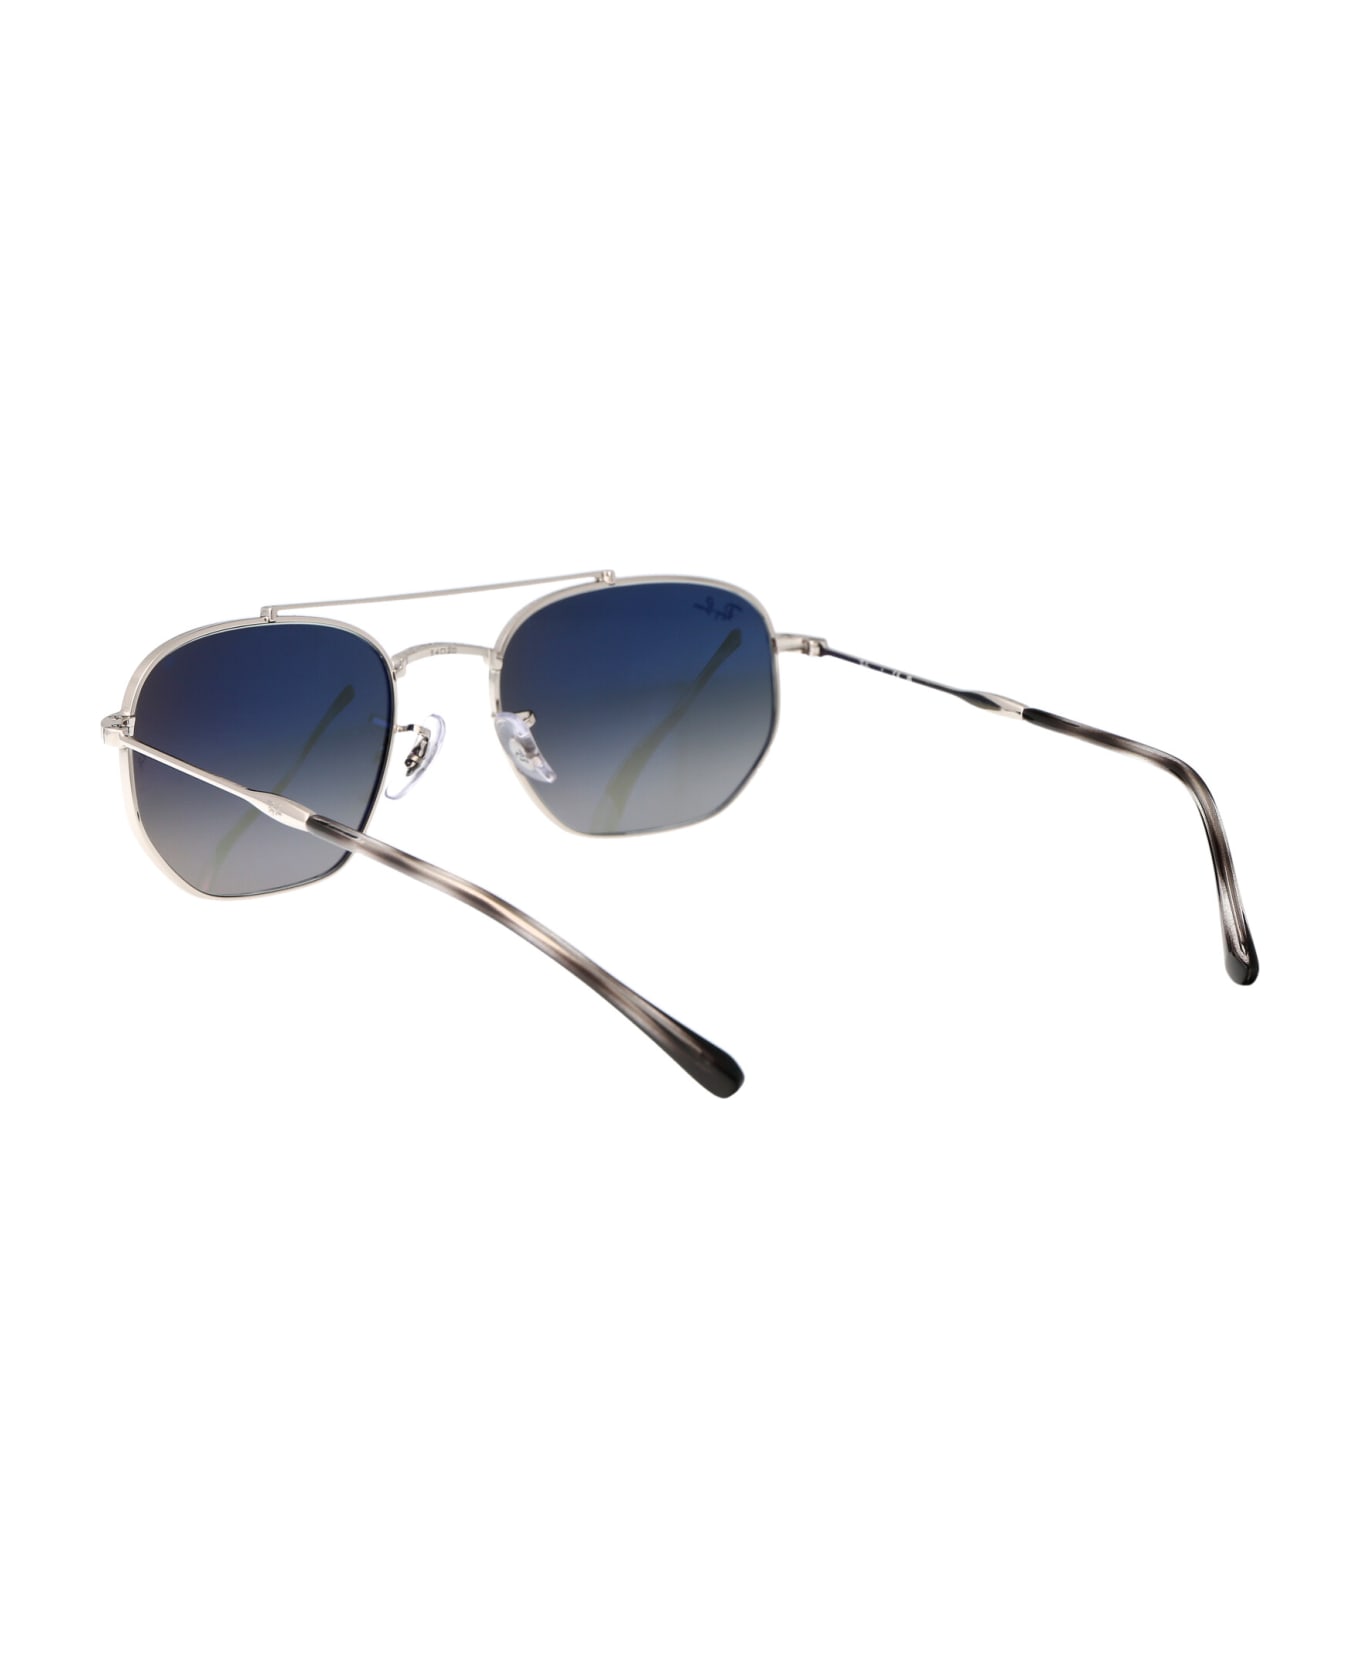 Ray-Ban 0rb3707 Sunglasses - 003/71 SILVER